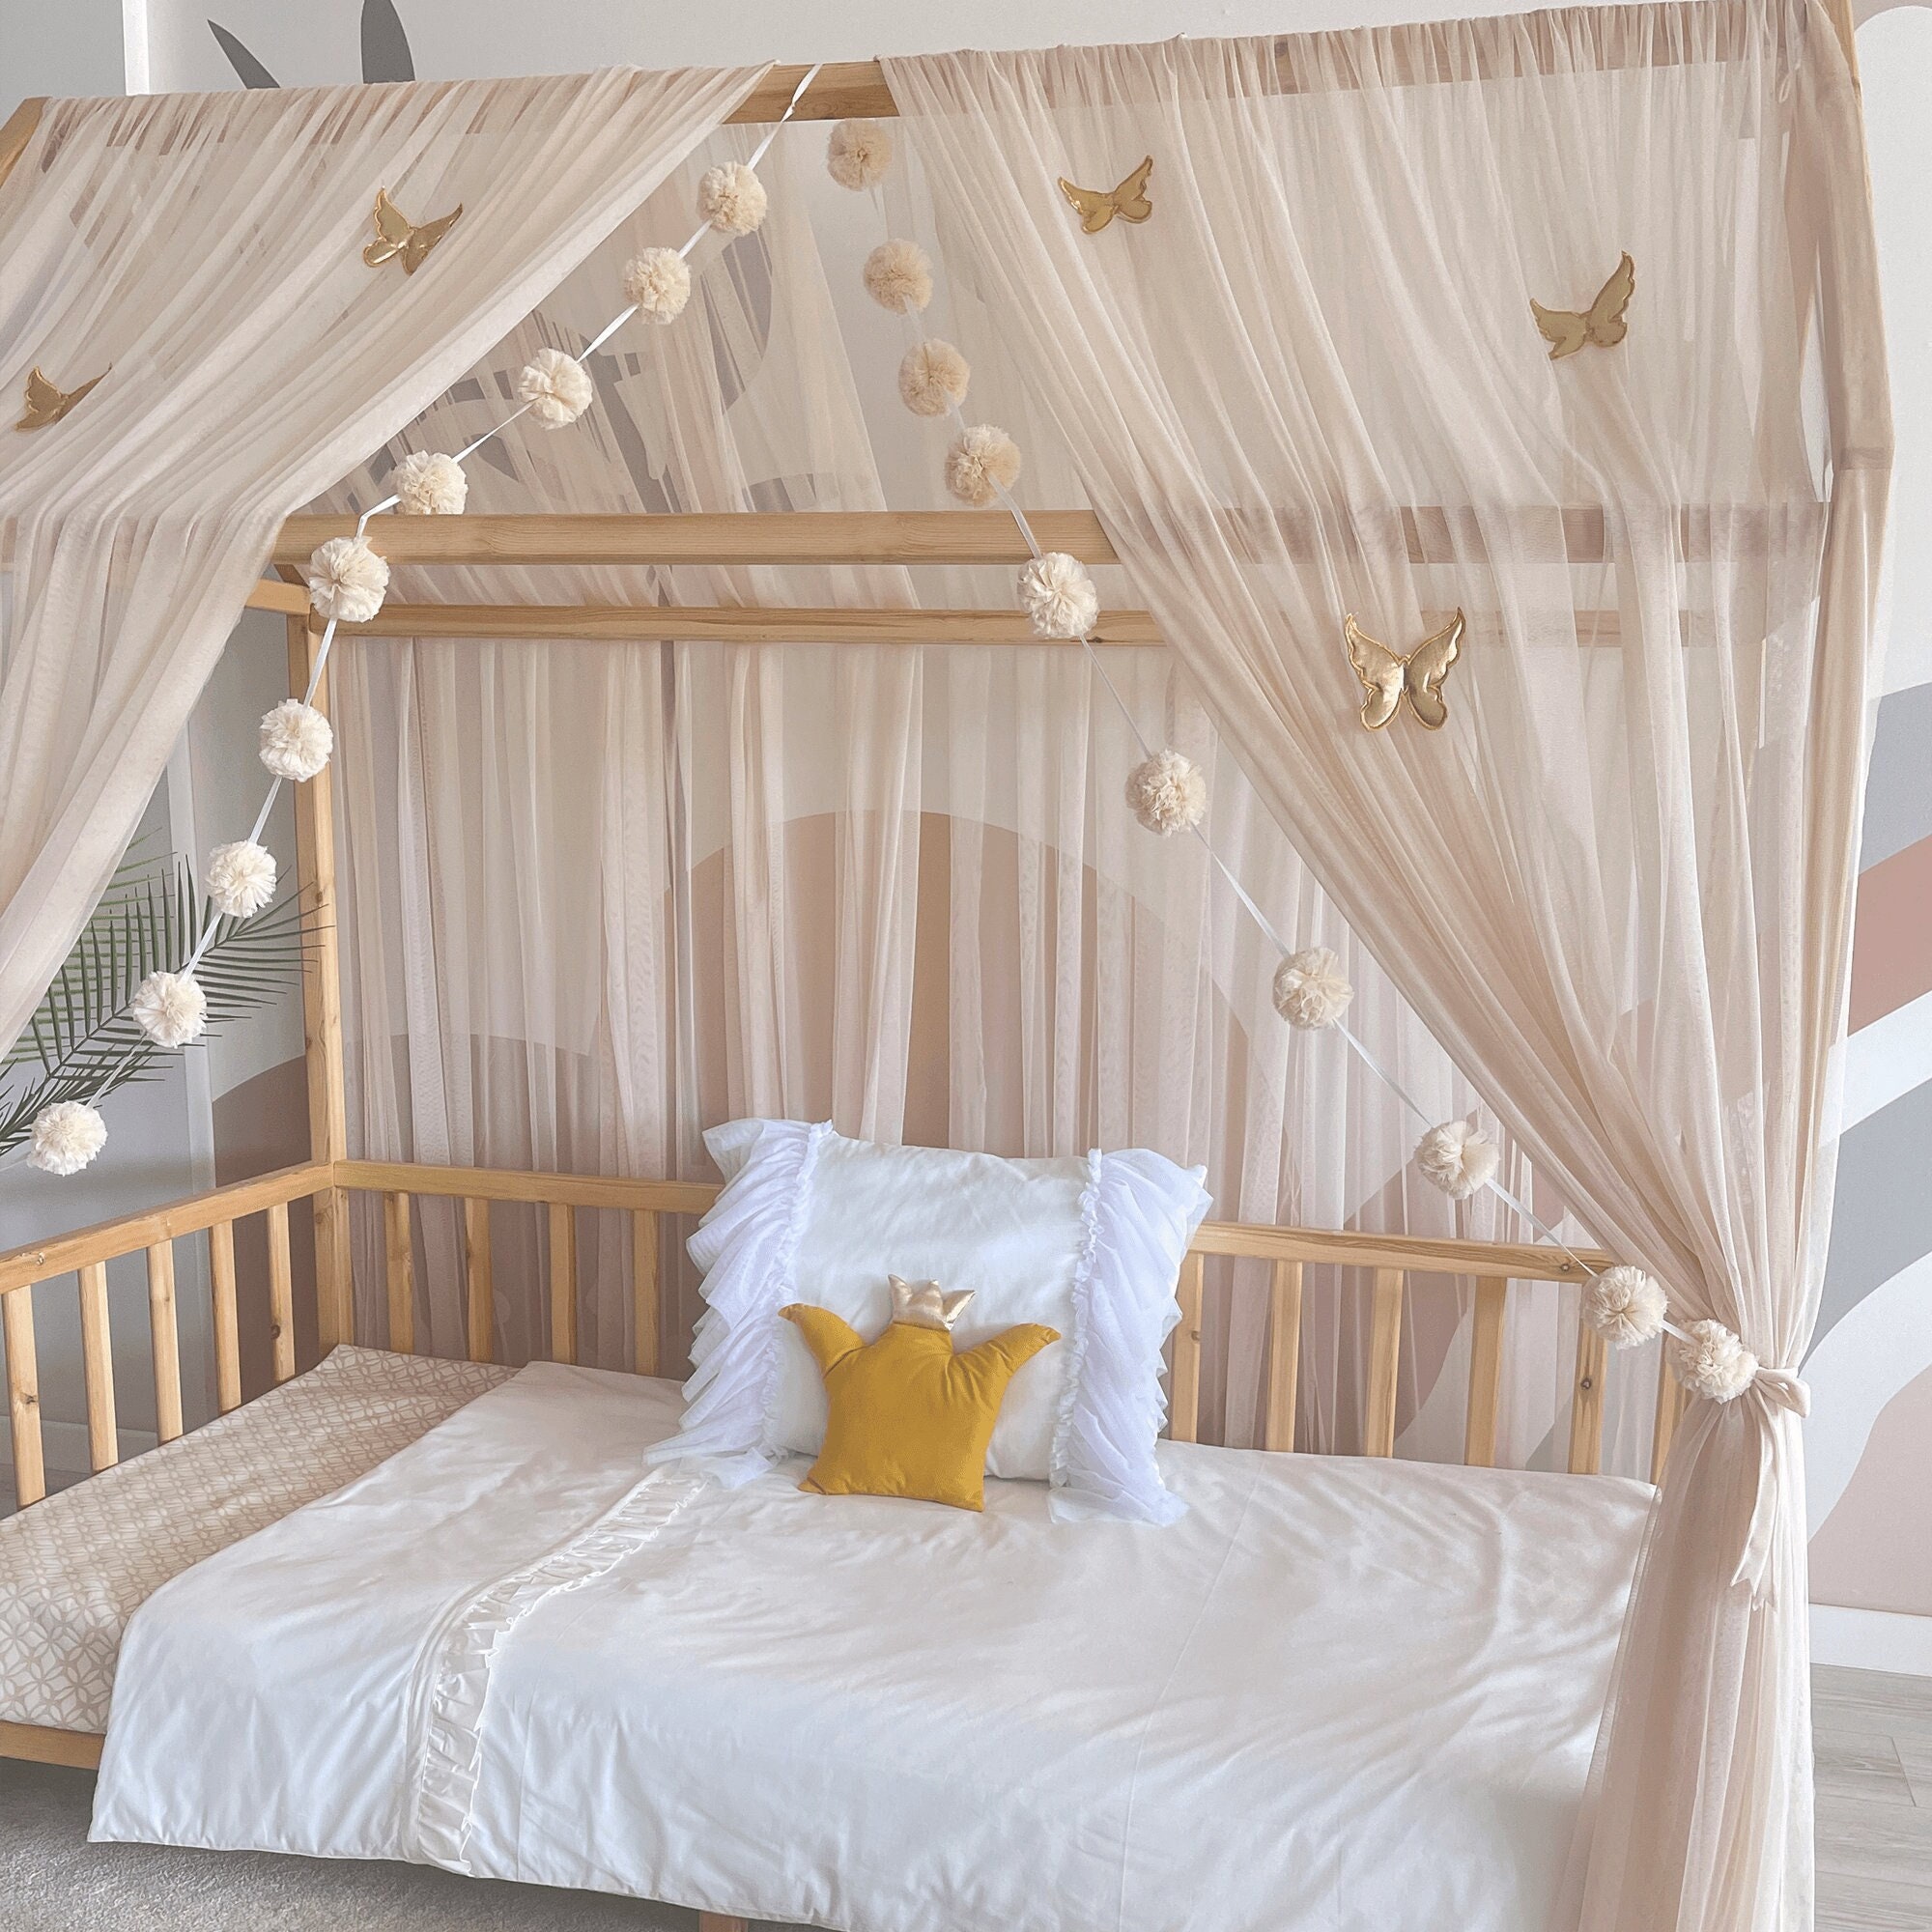 Montessori Bed Canopy, Kids Bed Canopy, Montessori Bed Curtains, Crib  Netting, Kids Room Decor, Mosquito Net for Bed Nursery, Tulle Canopy 